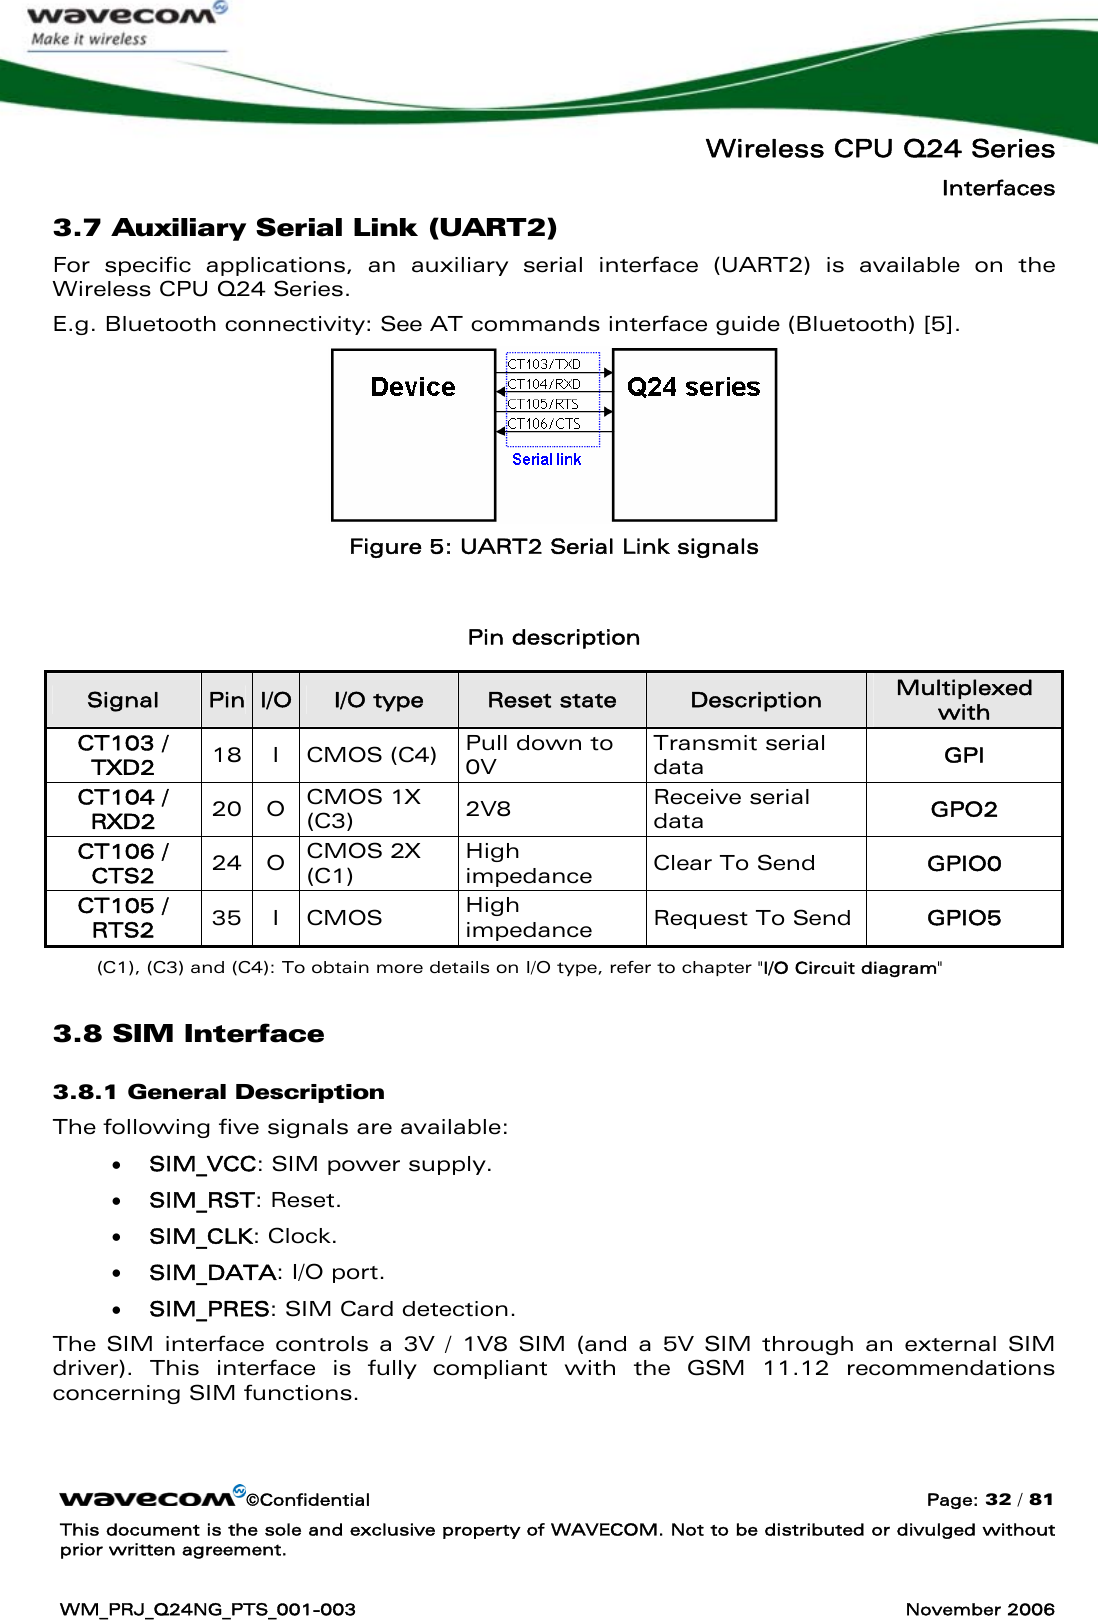   Wireless CPU Q24 Series Interfaces ©Confidential  Page: 32 / 81 This document is the sole and exclusive property of WAVECOM. Not to be distributed or divulged without prior written agreement.  WM_PRJ_Q24NG_PTS_001-003  November 2006  3.7 Auxiliary Serial Link (UART2) For specific applications, an auxiliary serial interface (UART2) is available on the Wireless CPU Q24 Series. E.g. Bluetooth connectivity: See AT commands interface guide (Bluetooth) [5].  Figure 5: UART2 Serial Link signals  Pin description Signal  Pin  I/O  I/O type  Reset state  Description  Multiplexed with CT103 / TXD2  18 I CMOS (C4) Pull down to 0V Transmit serial data  GPI CT104 / RXD2  20 O CMOS 1X (C3)  2V8  Receive serial data  GPO2 CT106 / CTS2  24 O CMOS 2X (C1) High impedance  Clear To Send  GPIO0 CT105 / RTS2  35 I CMOS  High impedance  Request To Send  GPIO5 (C1), (C3) and (C4): To obtain more details on I/O type, refer to chapter &quot;I/O Circuit diagram&quot; 3.8 SIM Interface 3.8.1 General Description The following five signals are available: • SIM_VCC: SIM power supply. • SIM_RST: Reset. • SIM_CLK: Clock. • SIM_DATA: I/O port. • SIM_PRES: SIM Card detection. The SIM interface controls a 3V / 1V8 SIM (and a 5V SIM through an external SIM driver). This interface is fully compliant with the GSM 11.12 recommendations concerning SIM functions. 